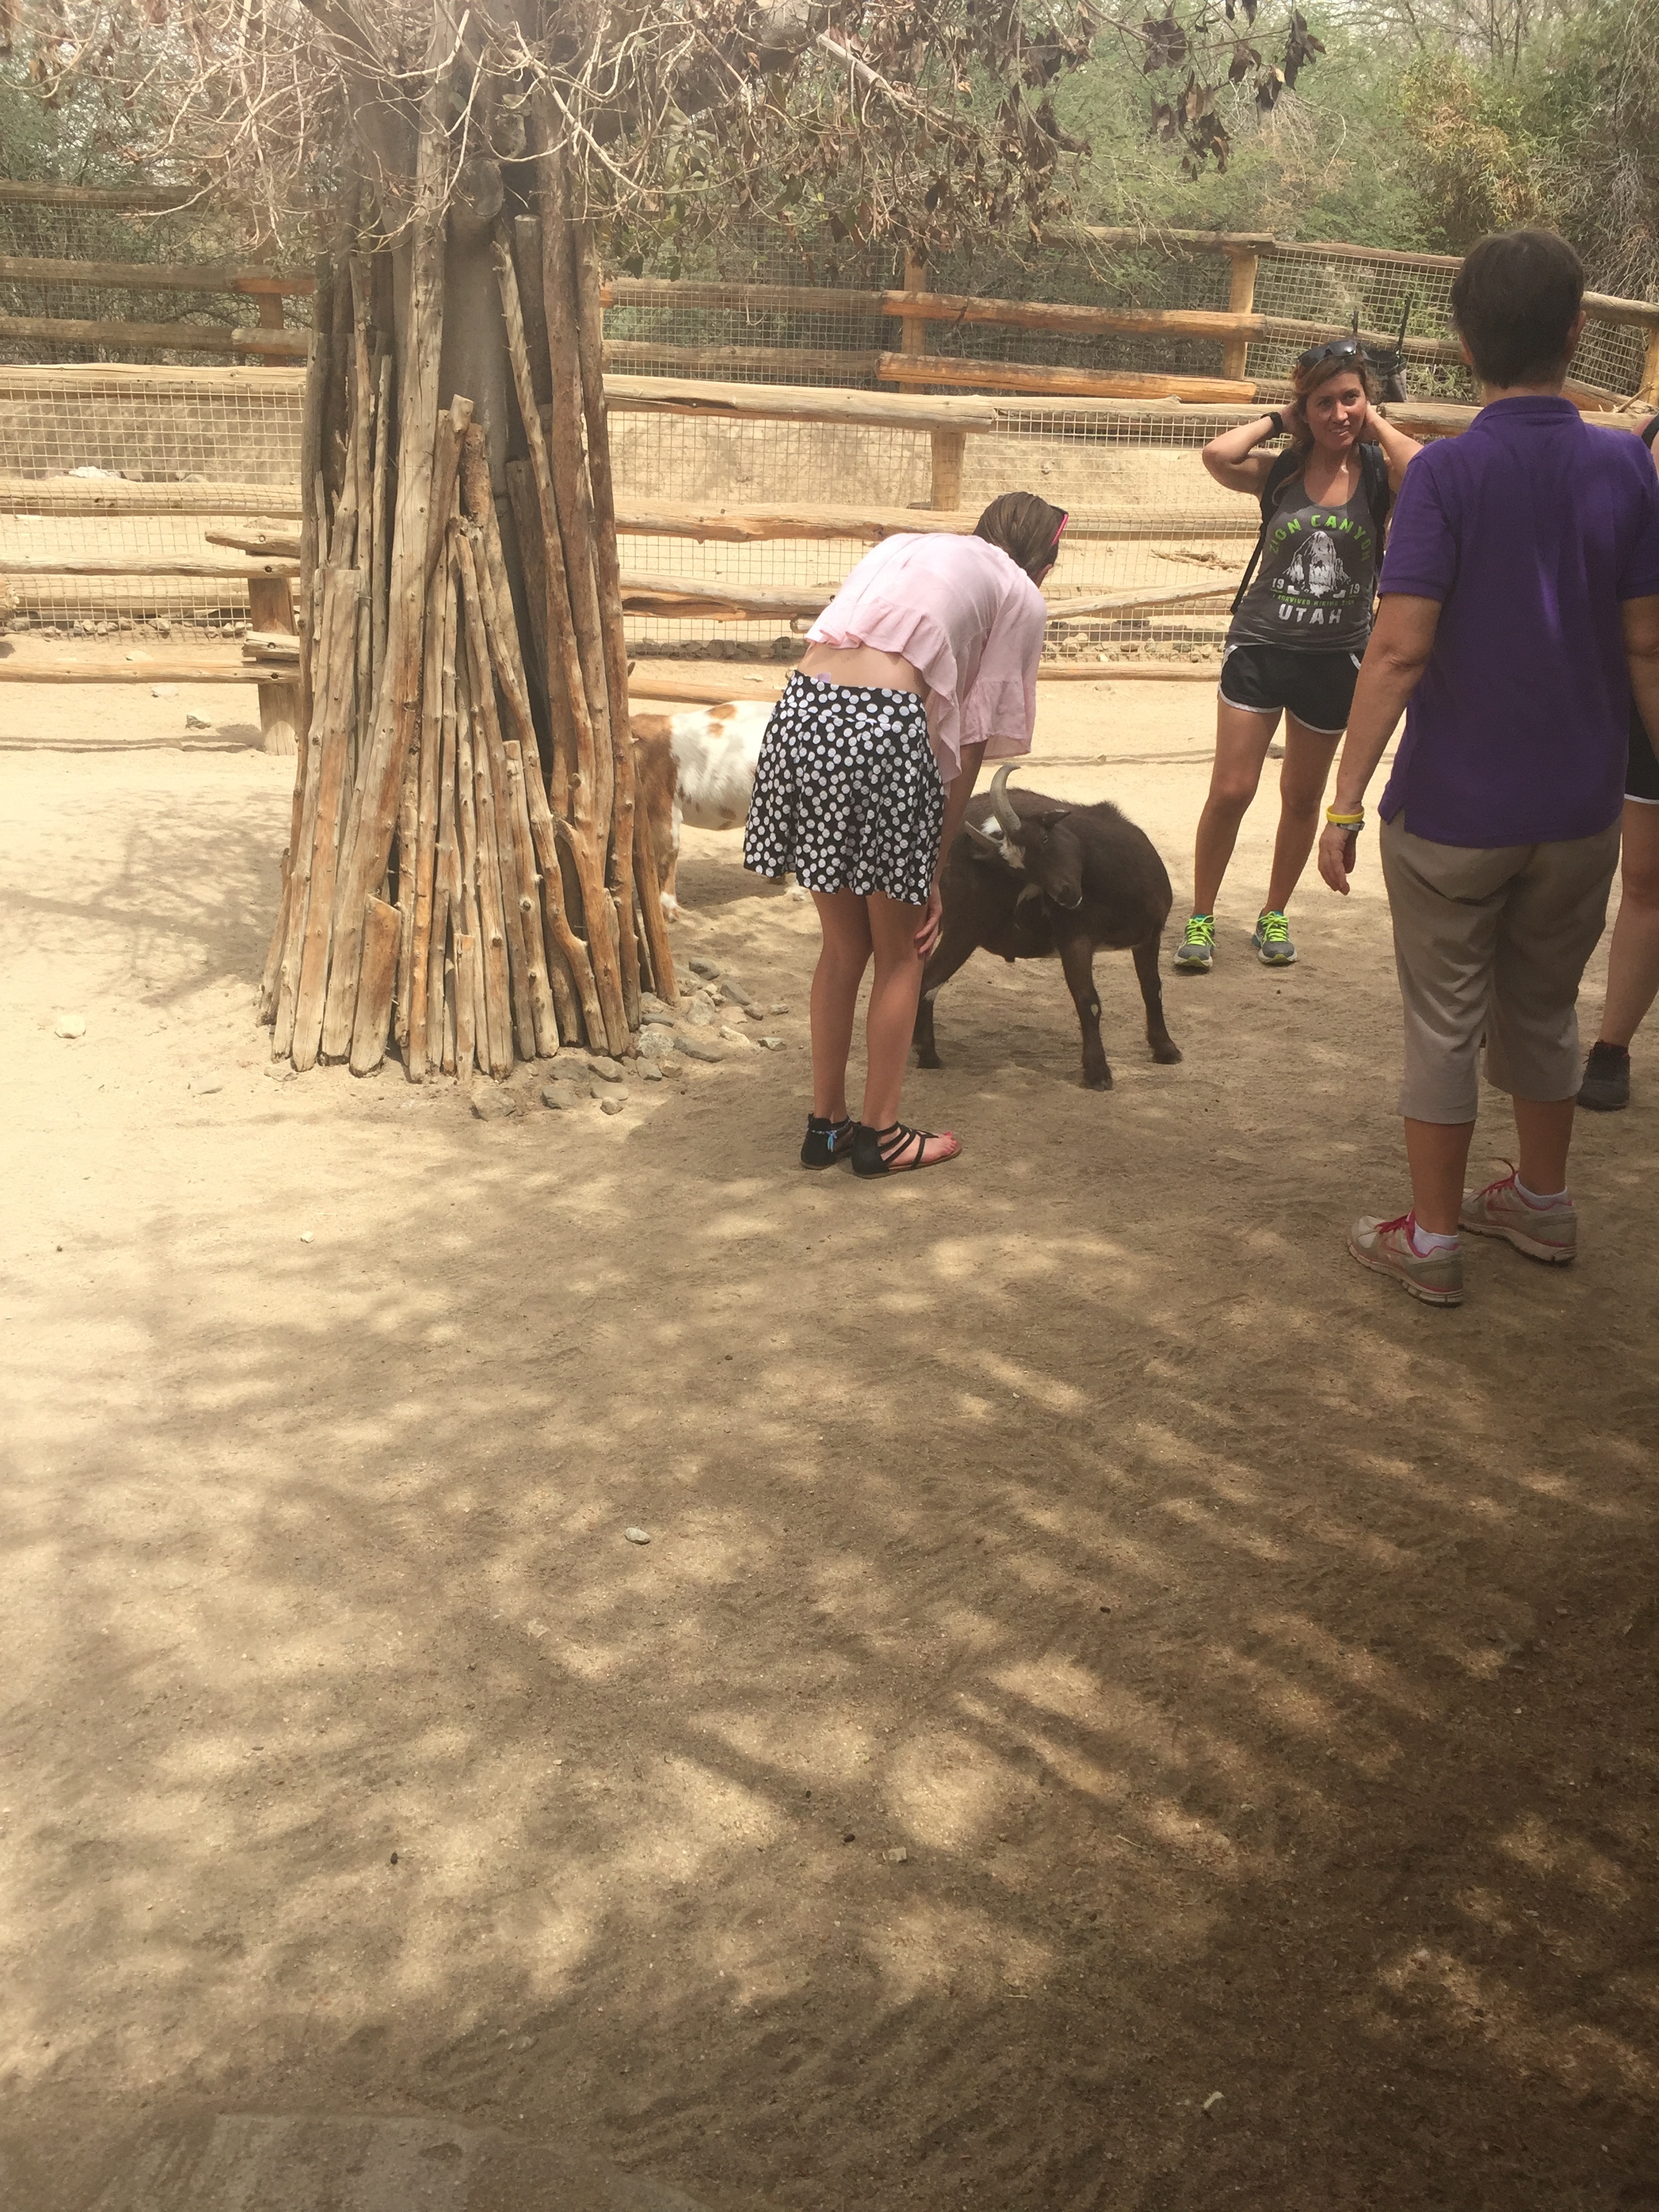  Petting goats at the Living Desert Zoo 